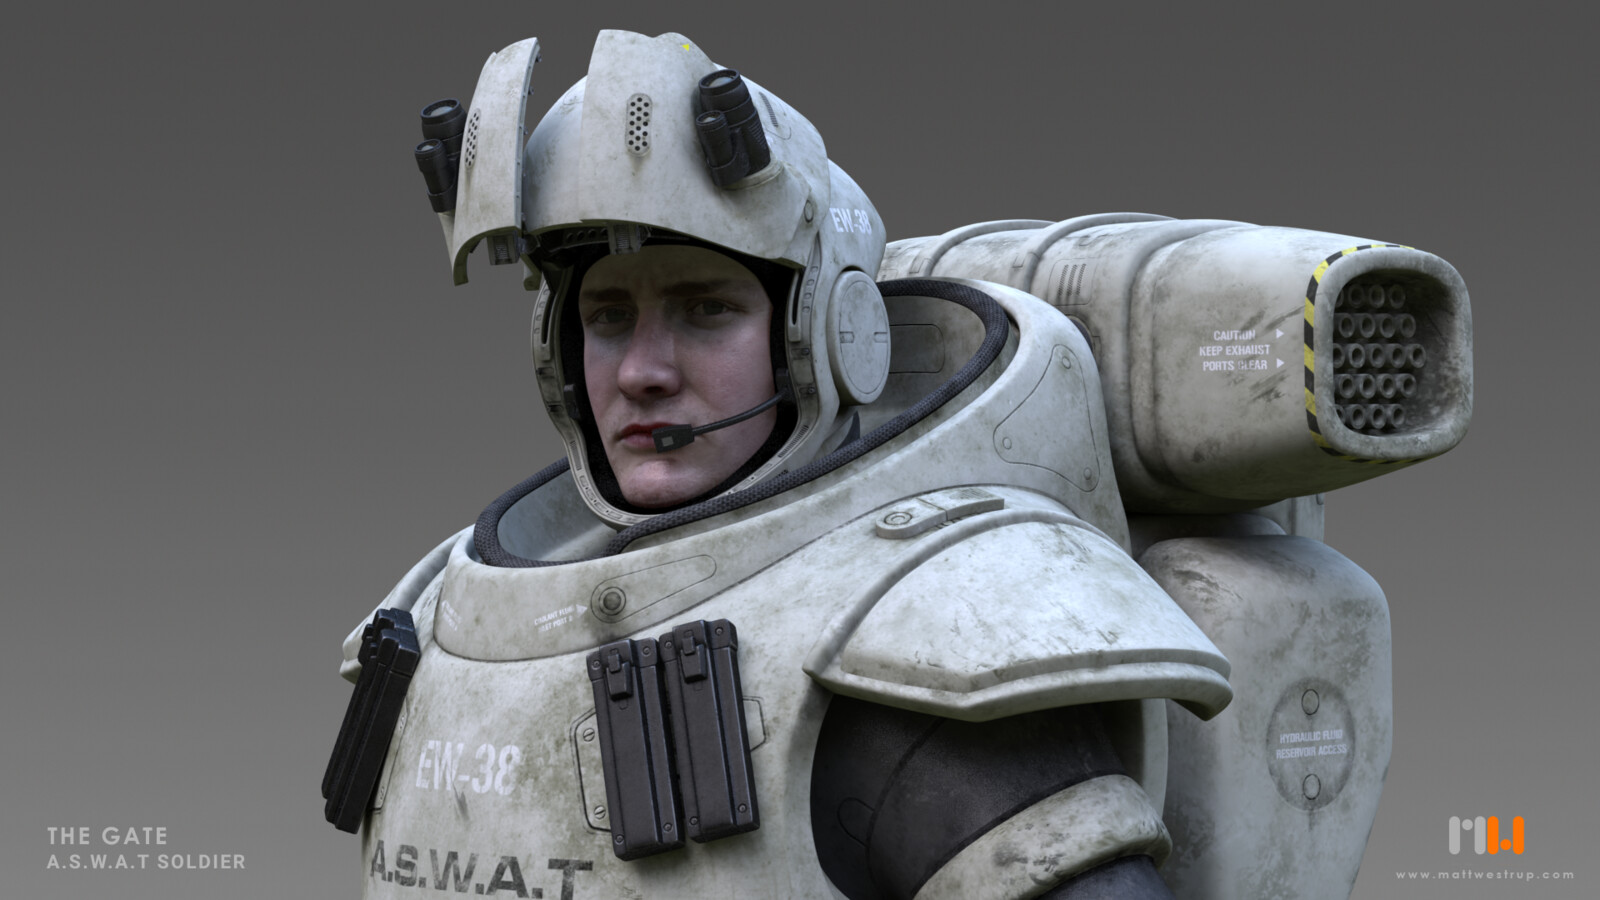 A.S.W.A.T Soldier - Role: Design, model, texture, lighting, rigging and animation.